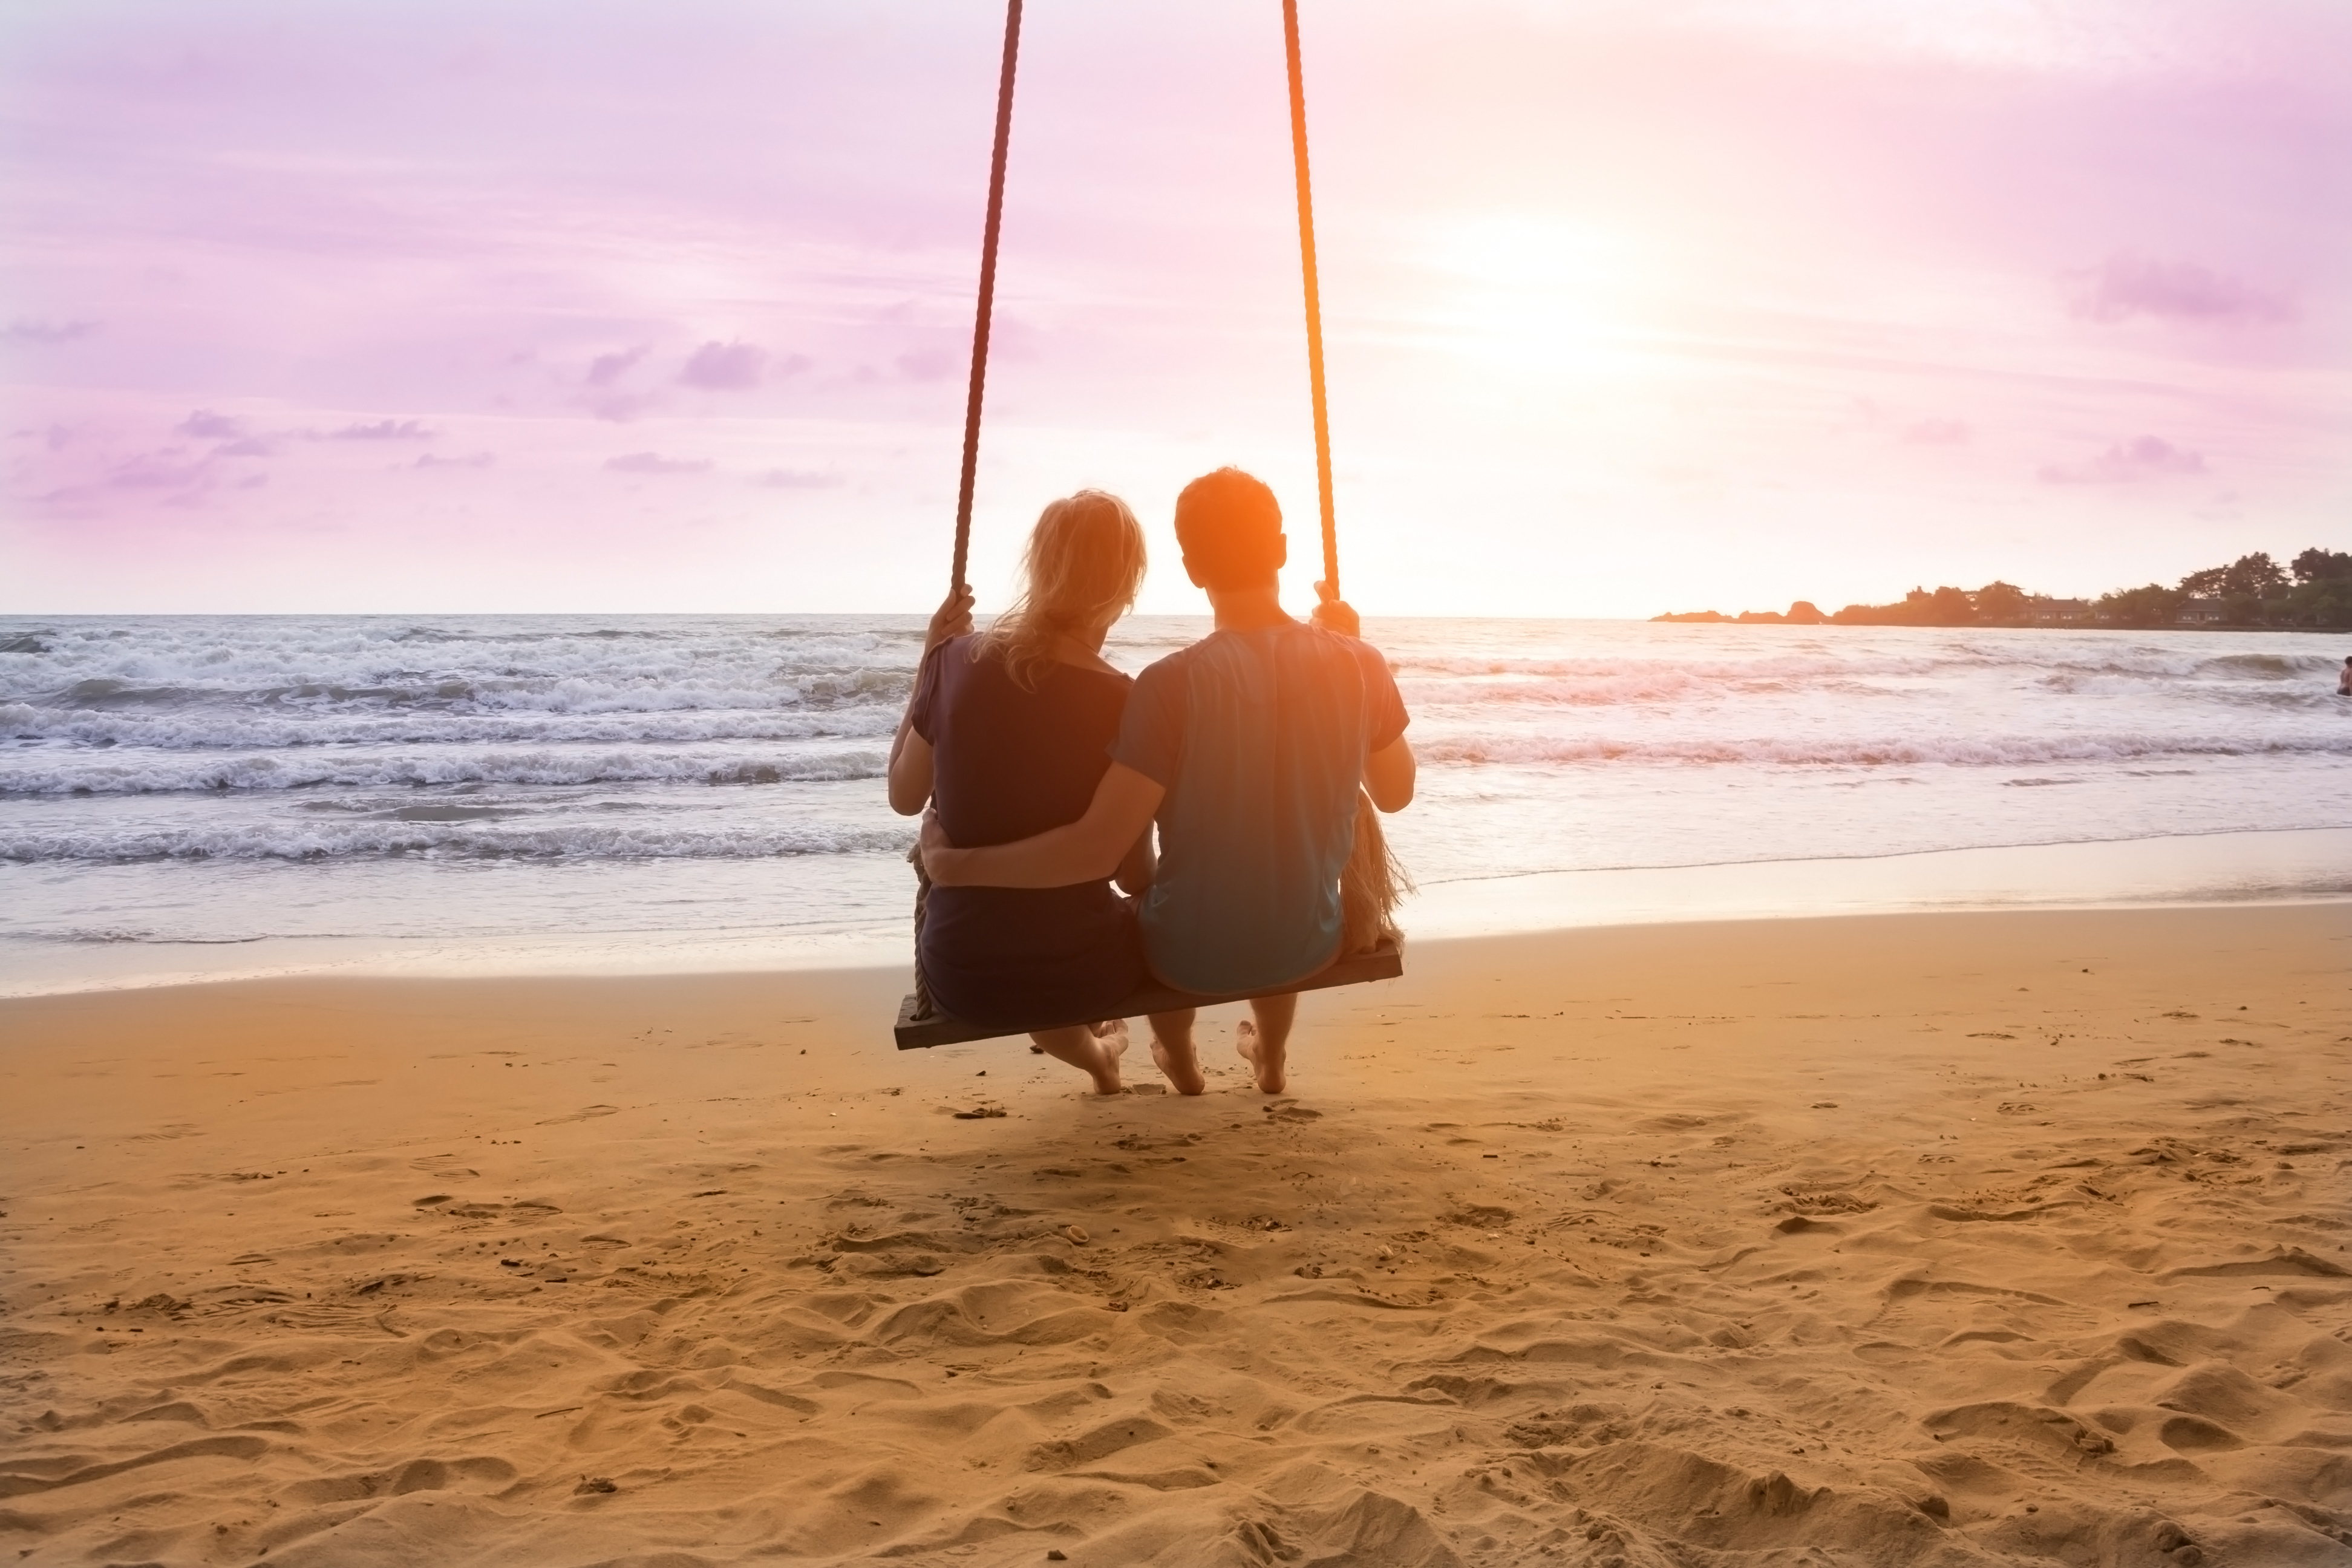 Couple sitting on the beach | Source: Shutterstock